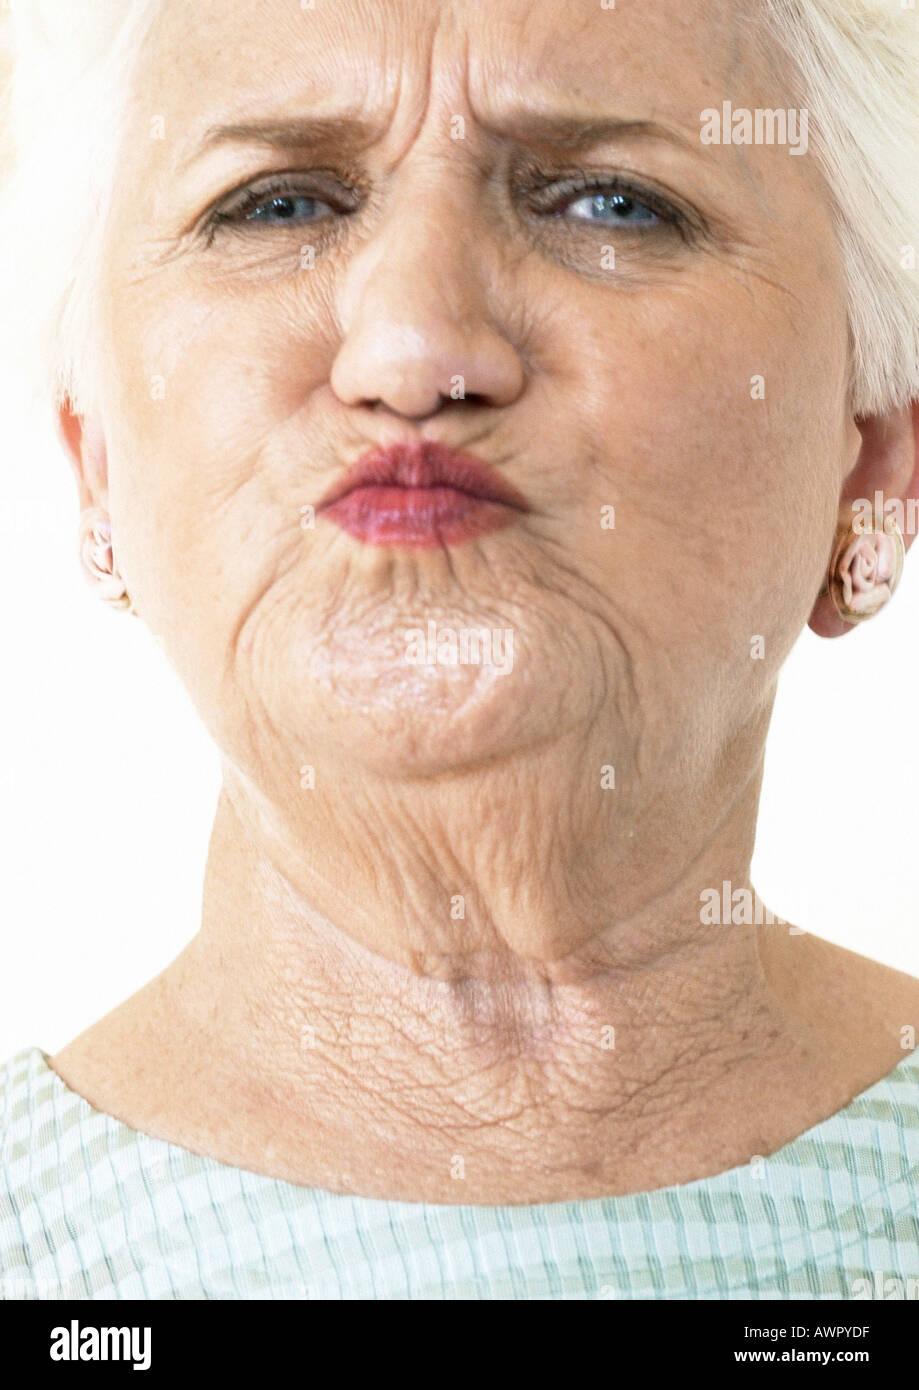 Elderly woman puckering lips and looking at camera, portrait, close-up Stock Photo